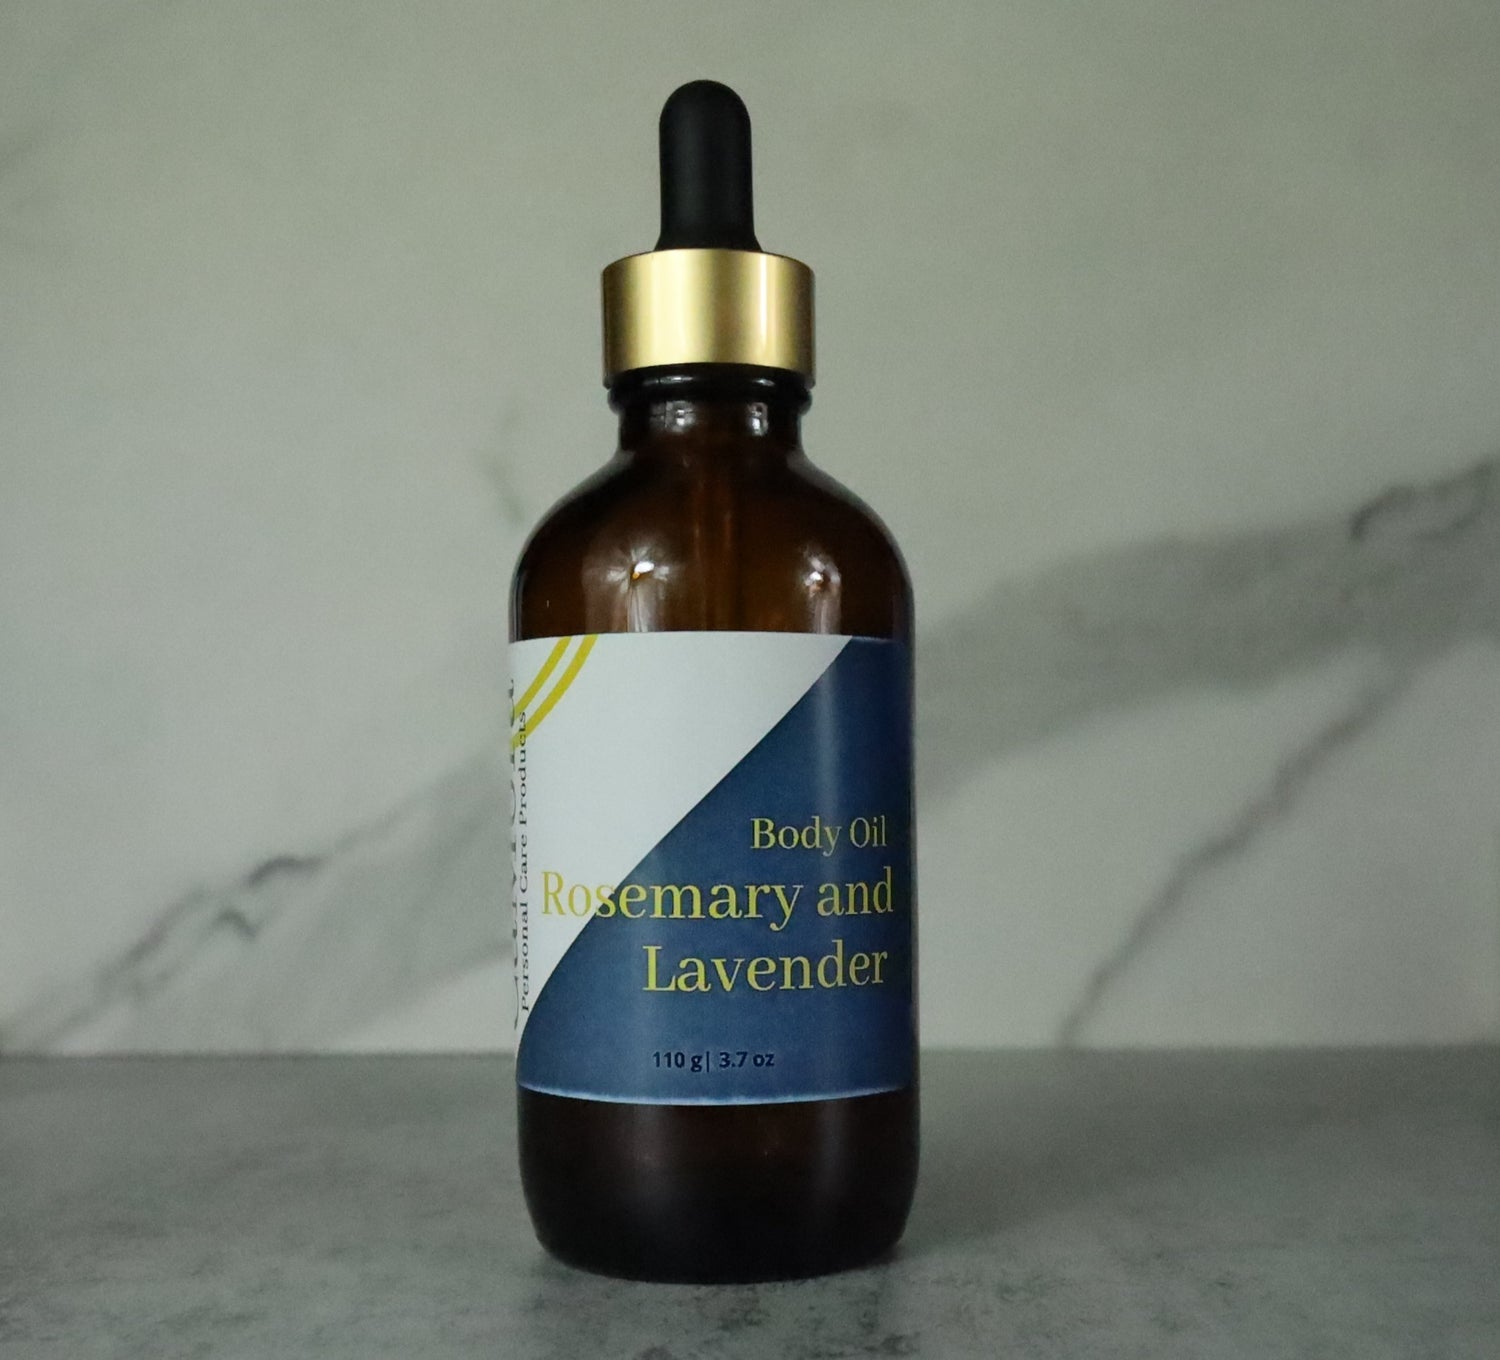 Ca'Mora Organic Rosemary and Lavender body oil.  4 ounce collage of bottles. Infused with organic Rosemary and lavender petals.